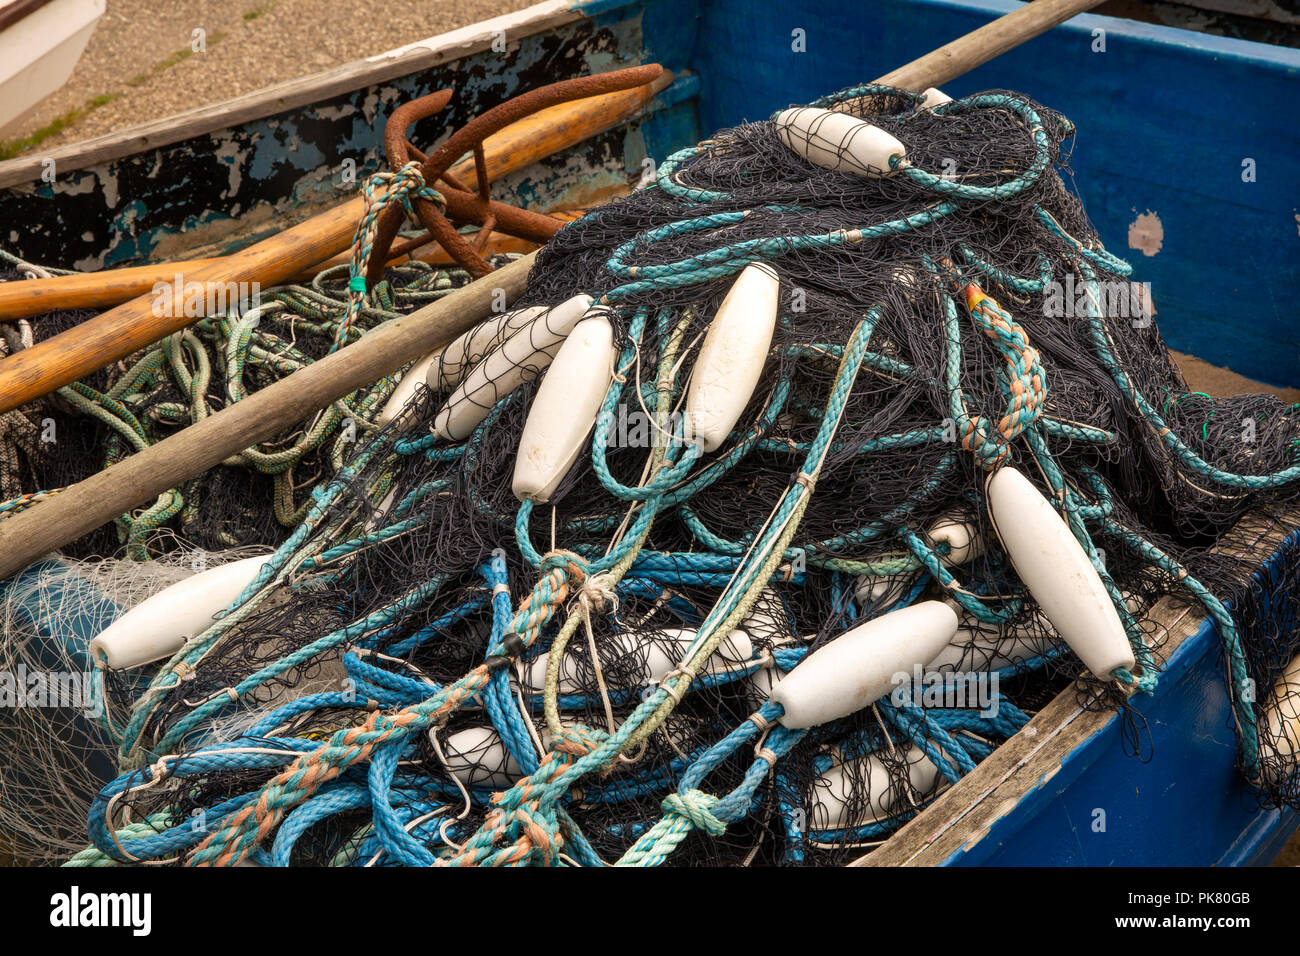 UK, England, Yorkshire, Filey, Coble Landing, fishermen’s nets and floats in fishing boat Stock Photo